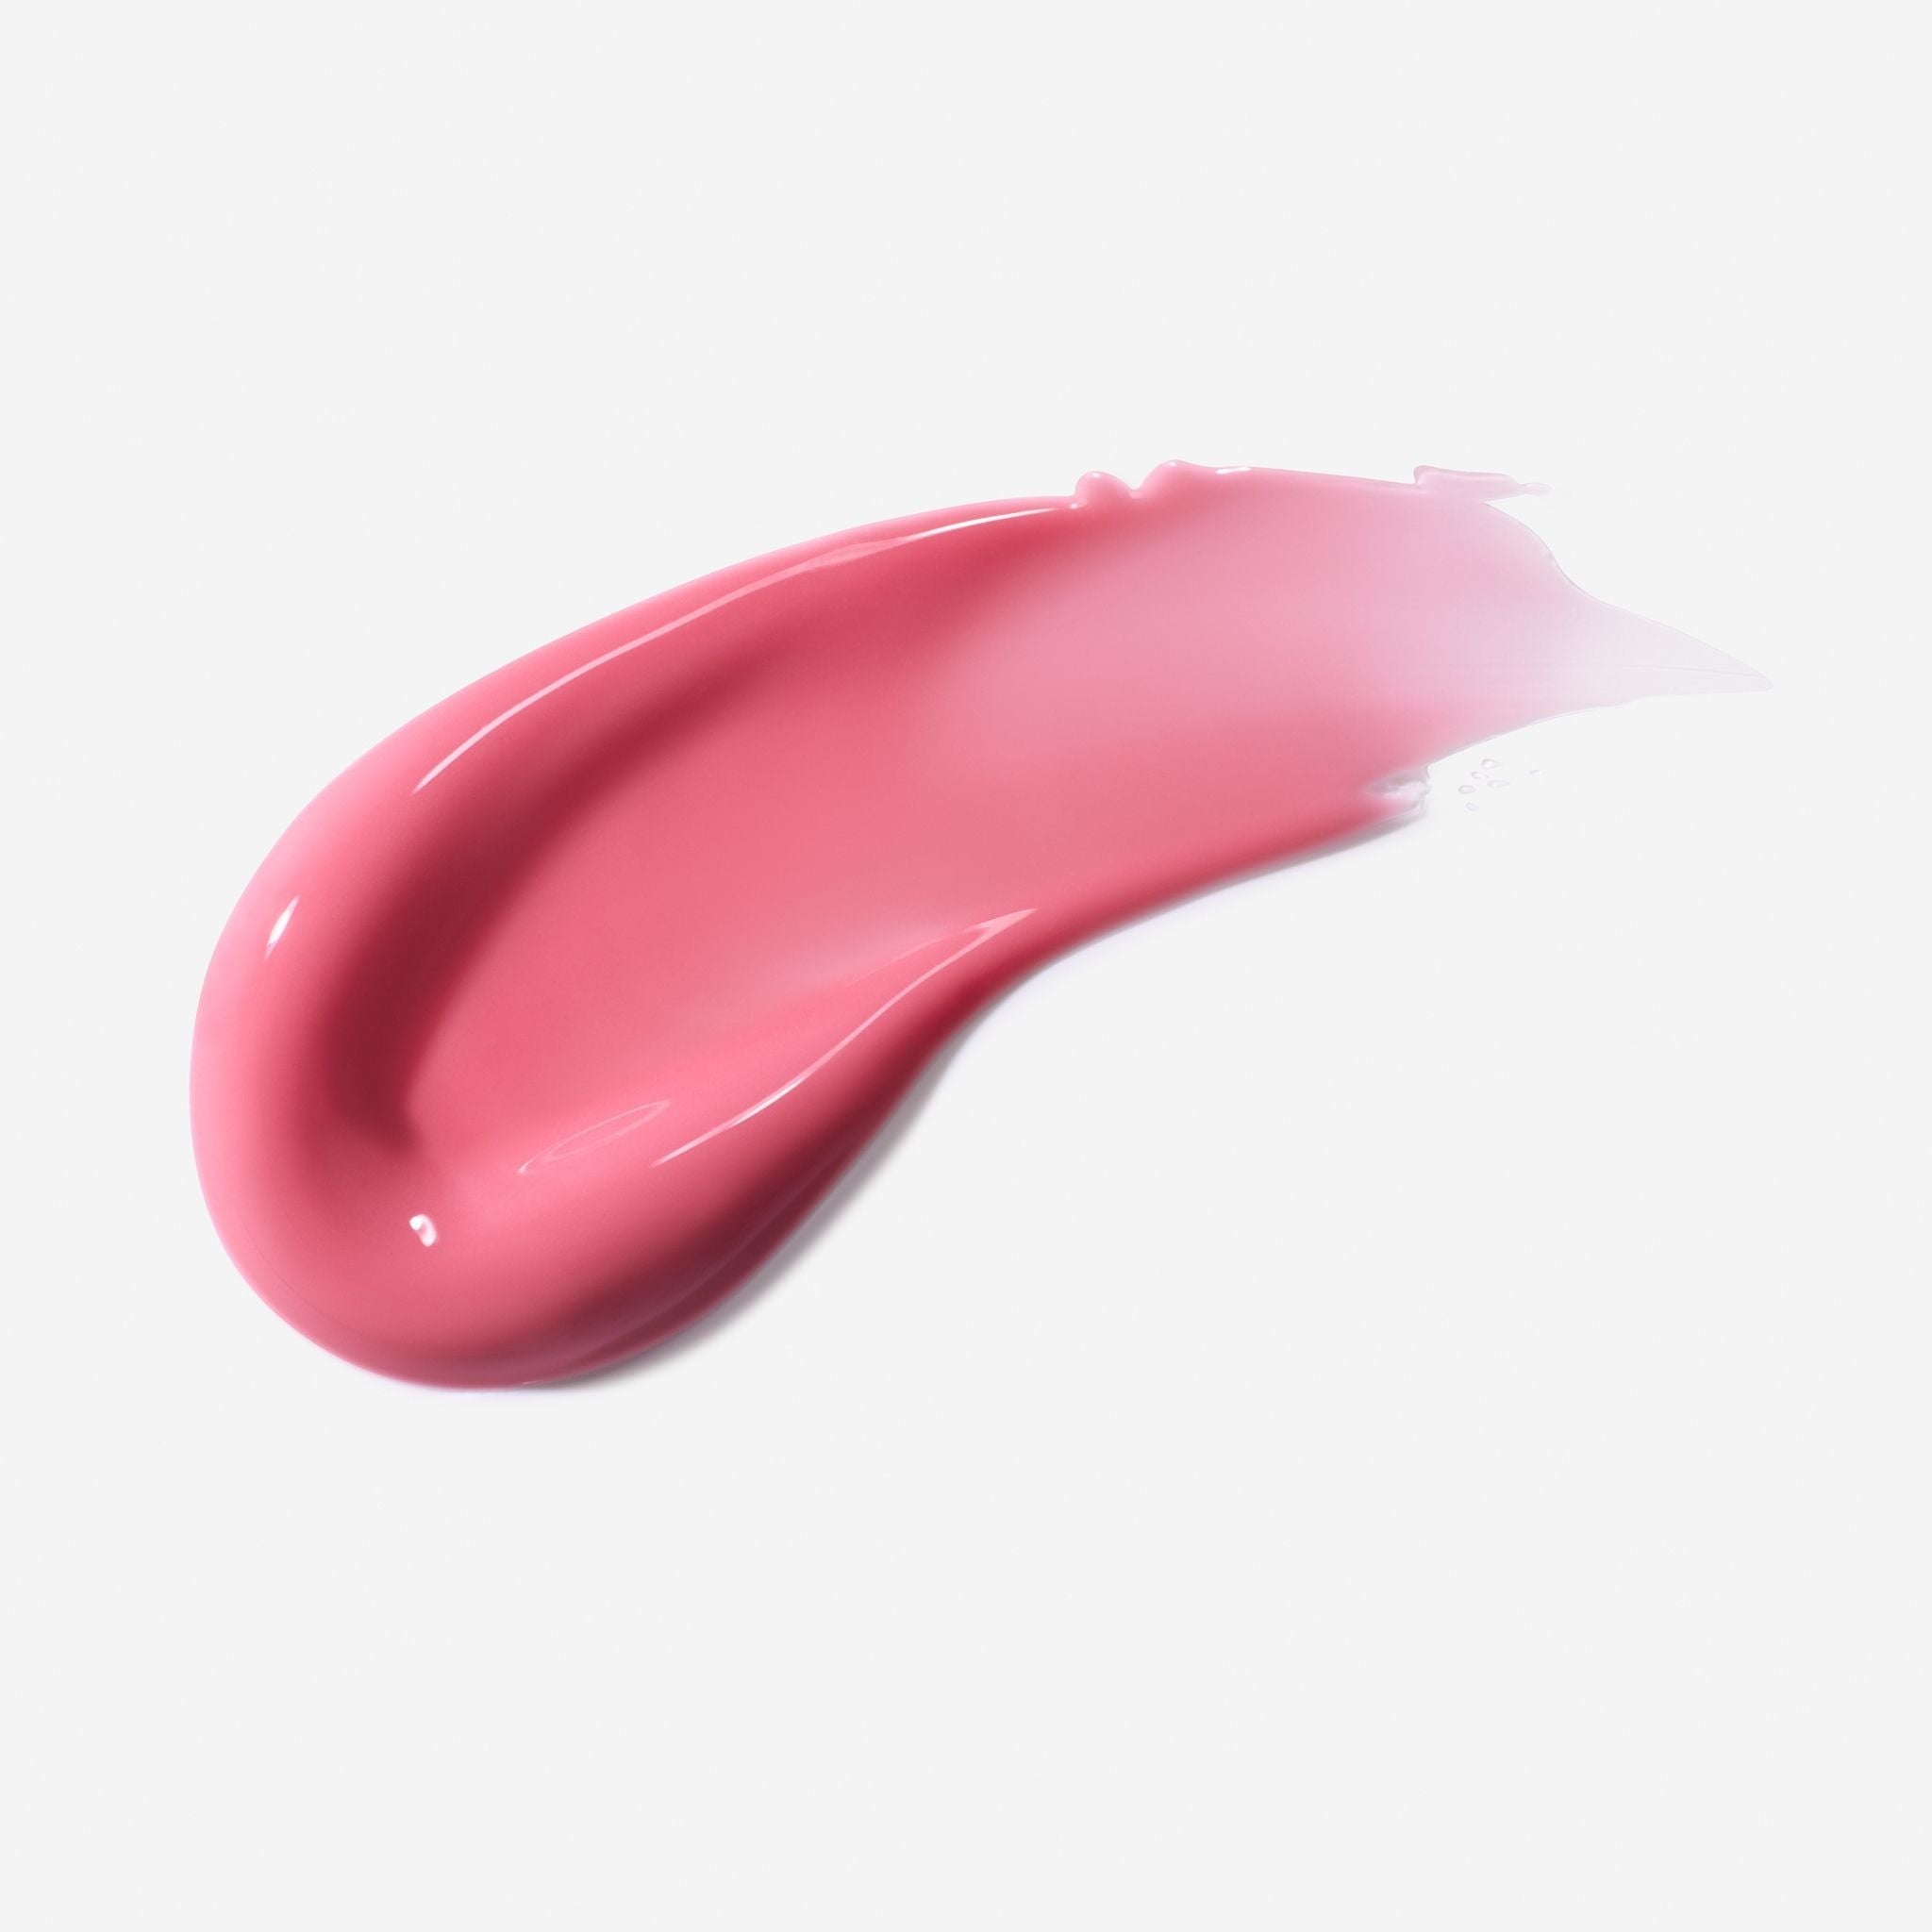 Perfect glob of pop lip gloss, previously known as pink natural. The ideal pink pop of color